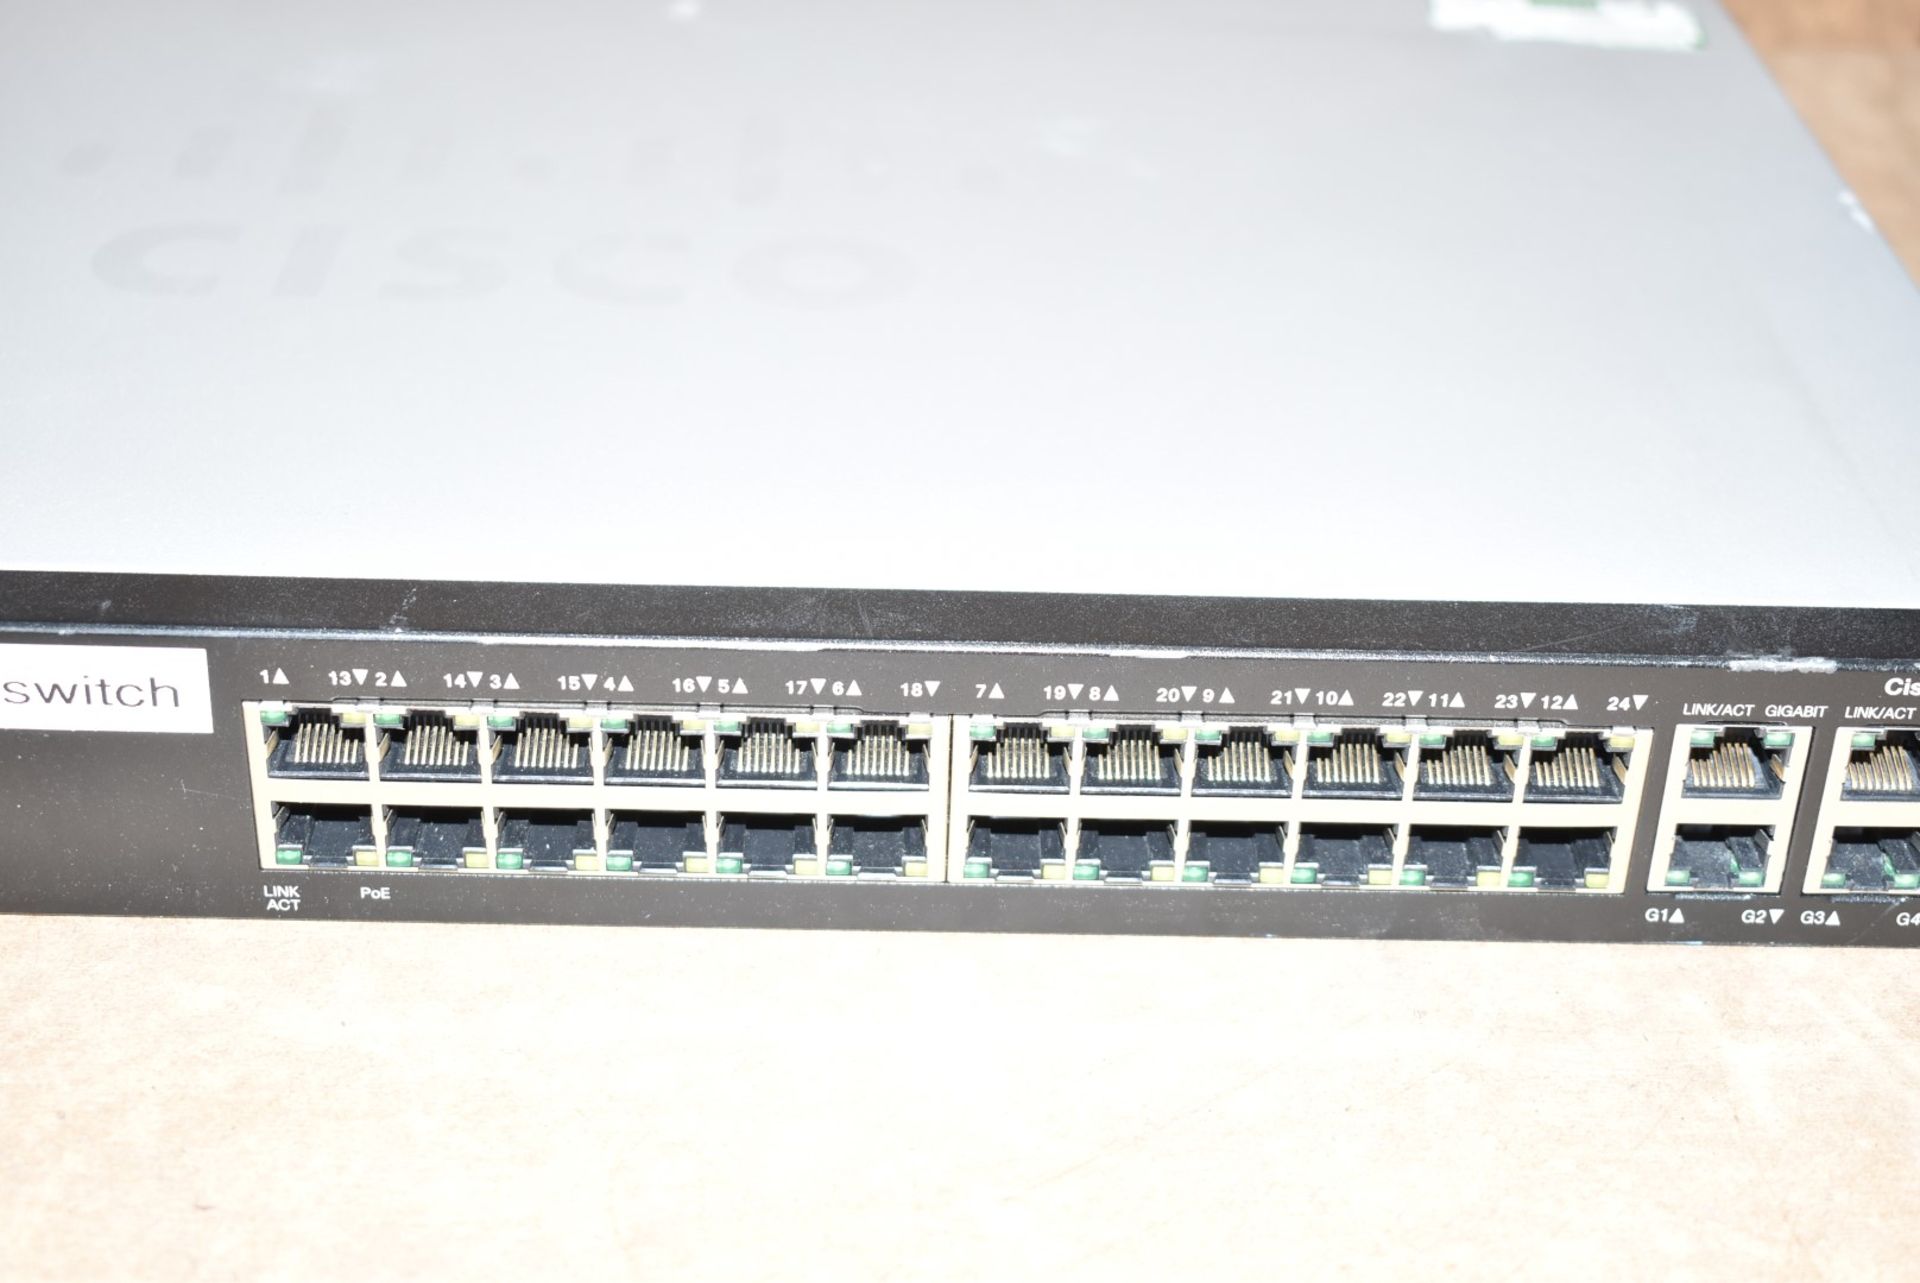 1 x Cisco SF300-24P 24-Port 10/100 PoE Managed Switch - Includes Power Cable - Ref: MPC156 CA - - Image 8 of 9